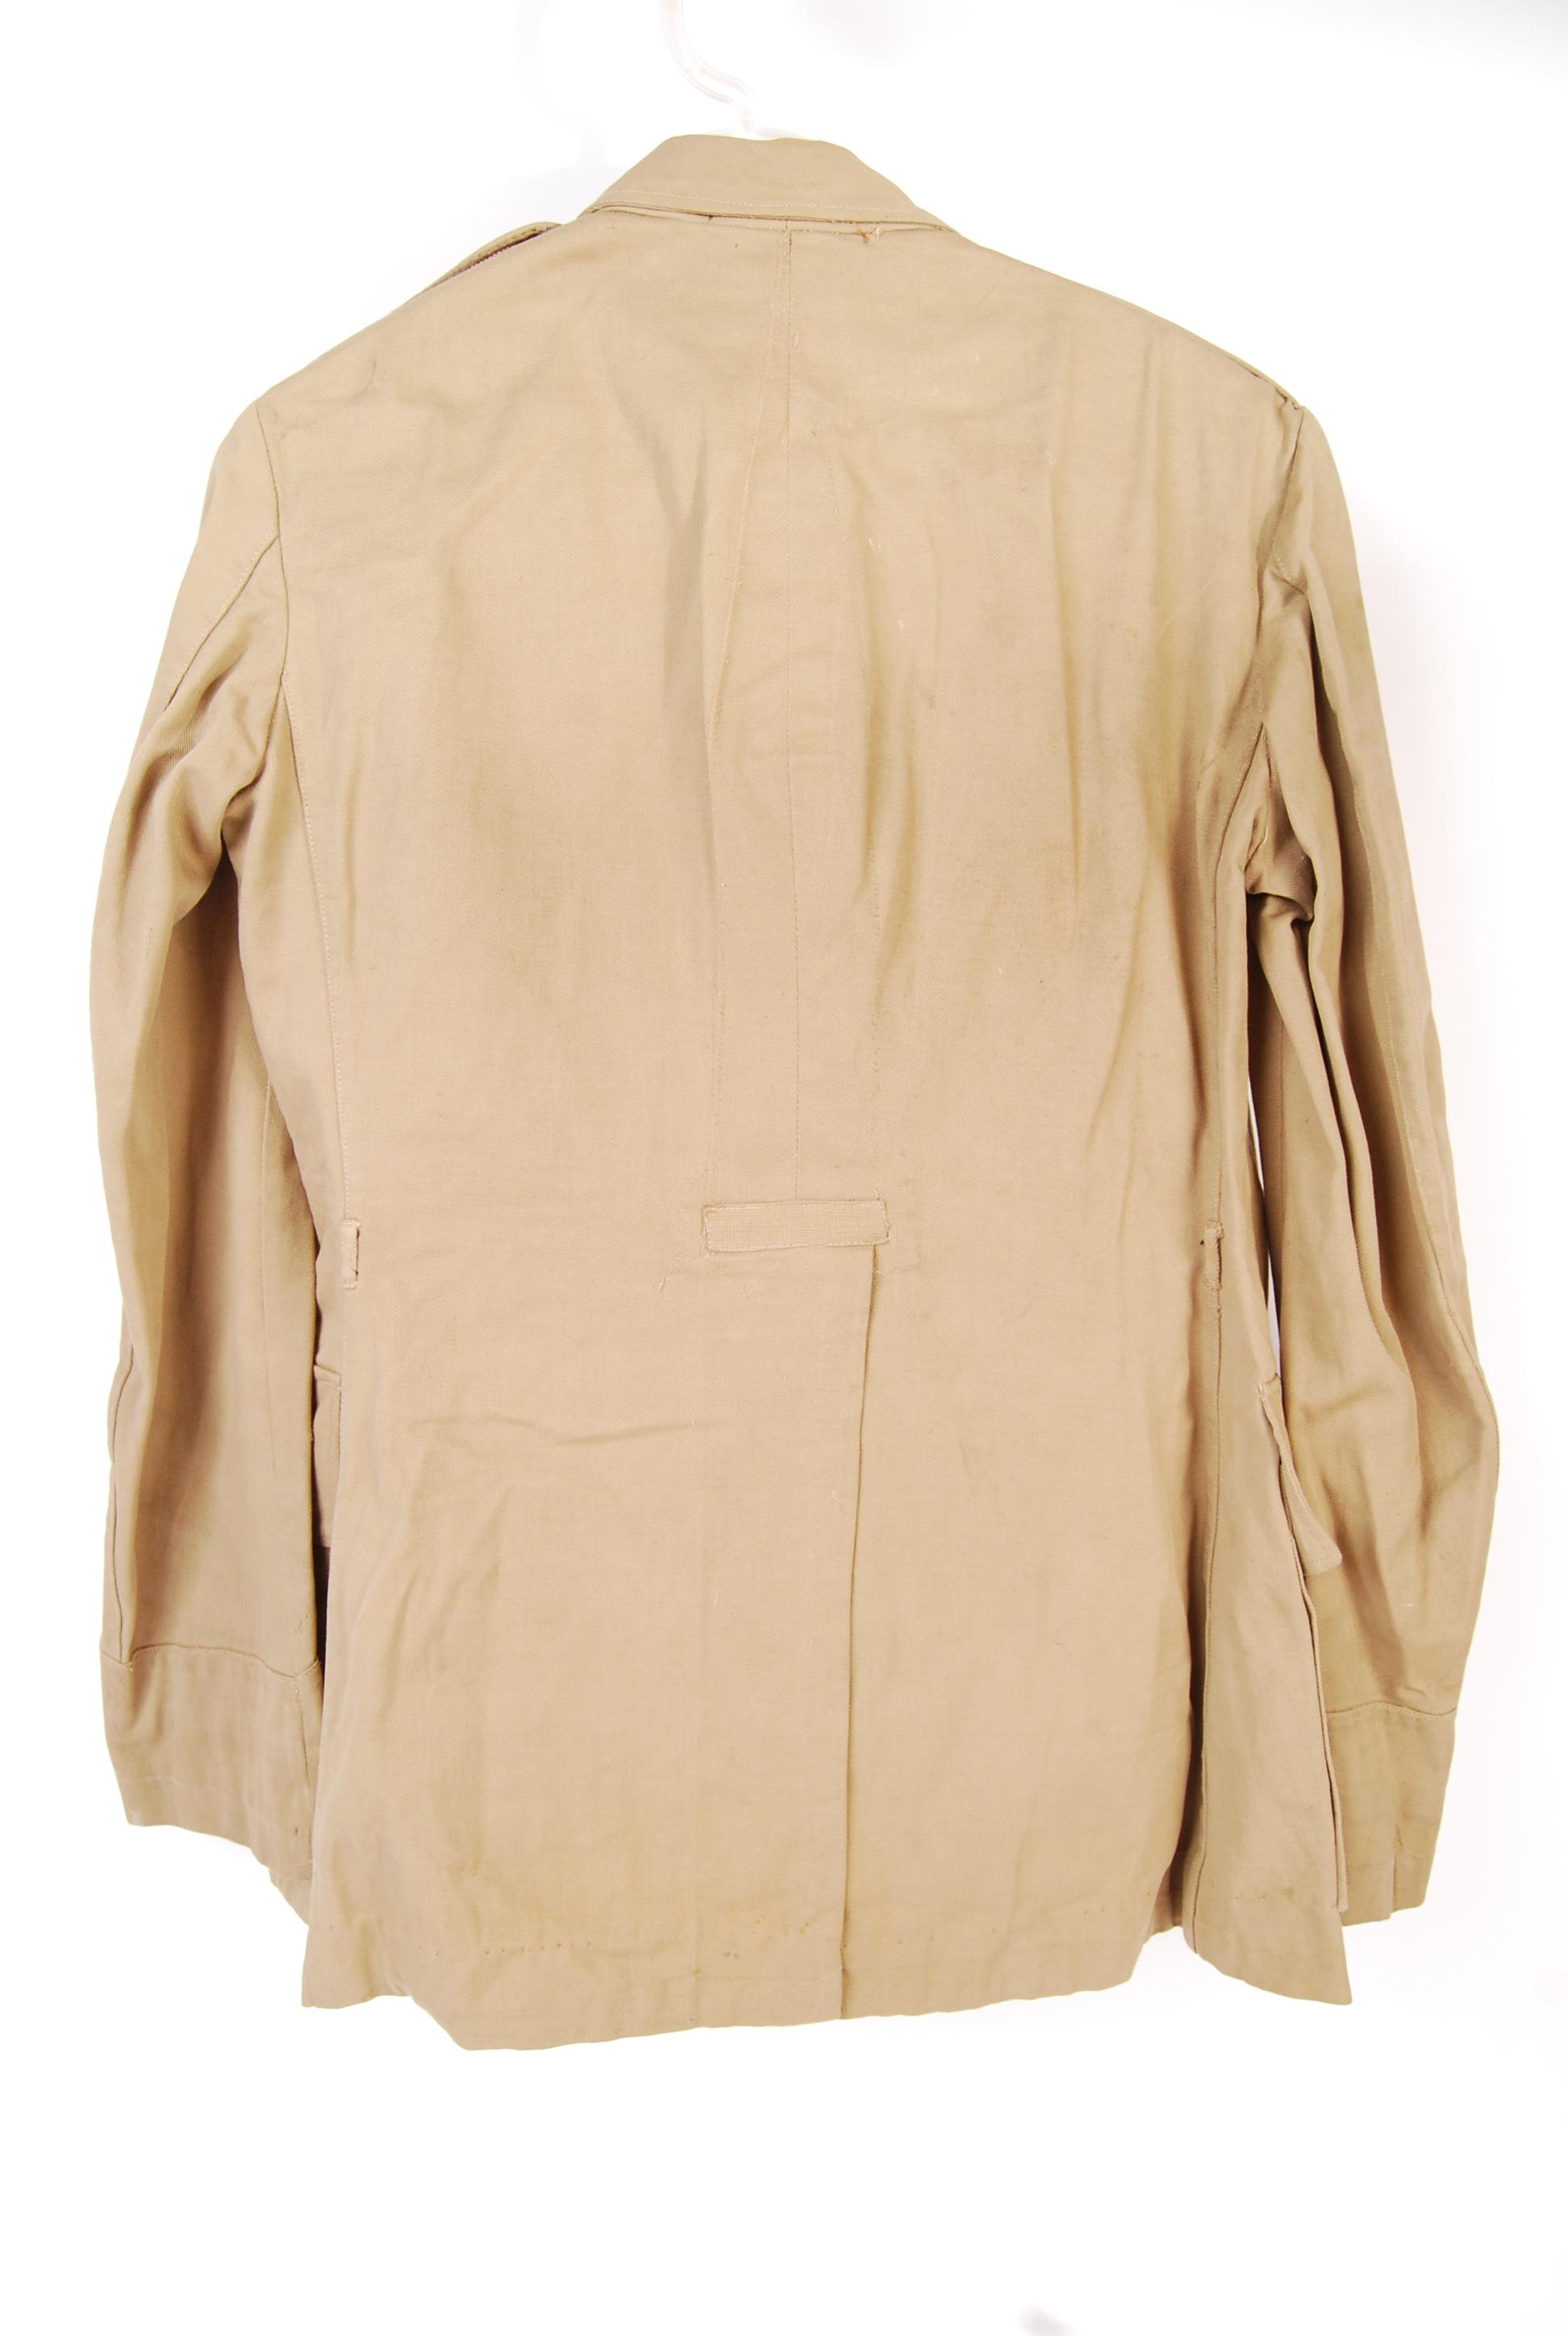 RARE WWII SERVICE UNIFORM TUNIC OWNED BY HARRY LEE, TENNIS PLAYER - Image 3 of 4